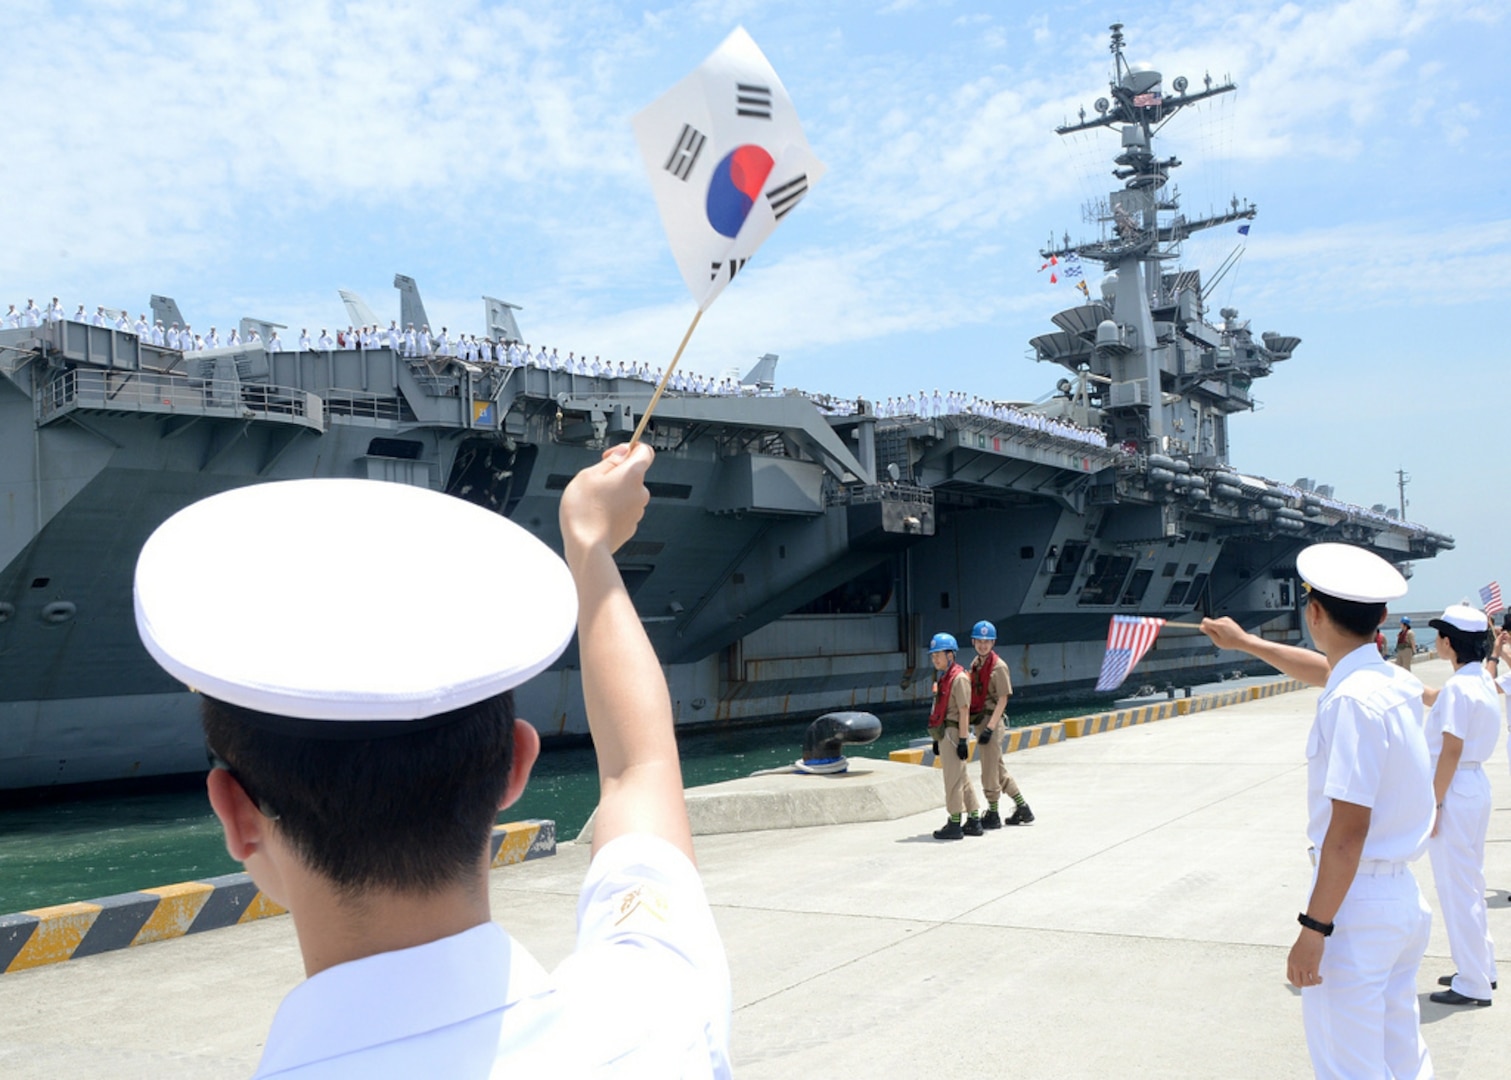 BUSAN, Republic of Korea (July 11, 2014) - Republic of Korea Navy sailors wave South Korean and American flags as the aircraft carrier USS George Washington (CVN 73) arrives in Busan for a port visit. George Washington is forward deployed to Yokosuka, Japan, in the U.S. 7th Fleet area of responsibility supporting regional security and stability in the Indo-Asia Pacific. 